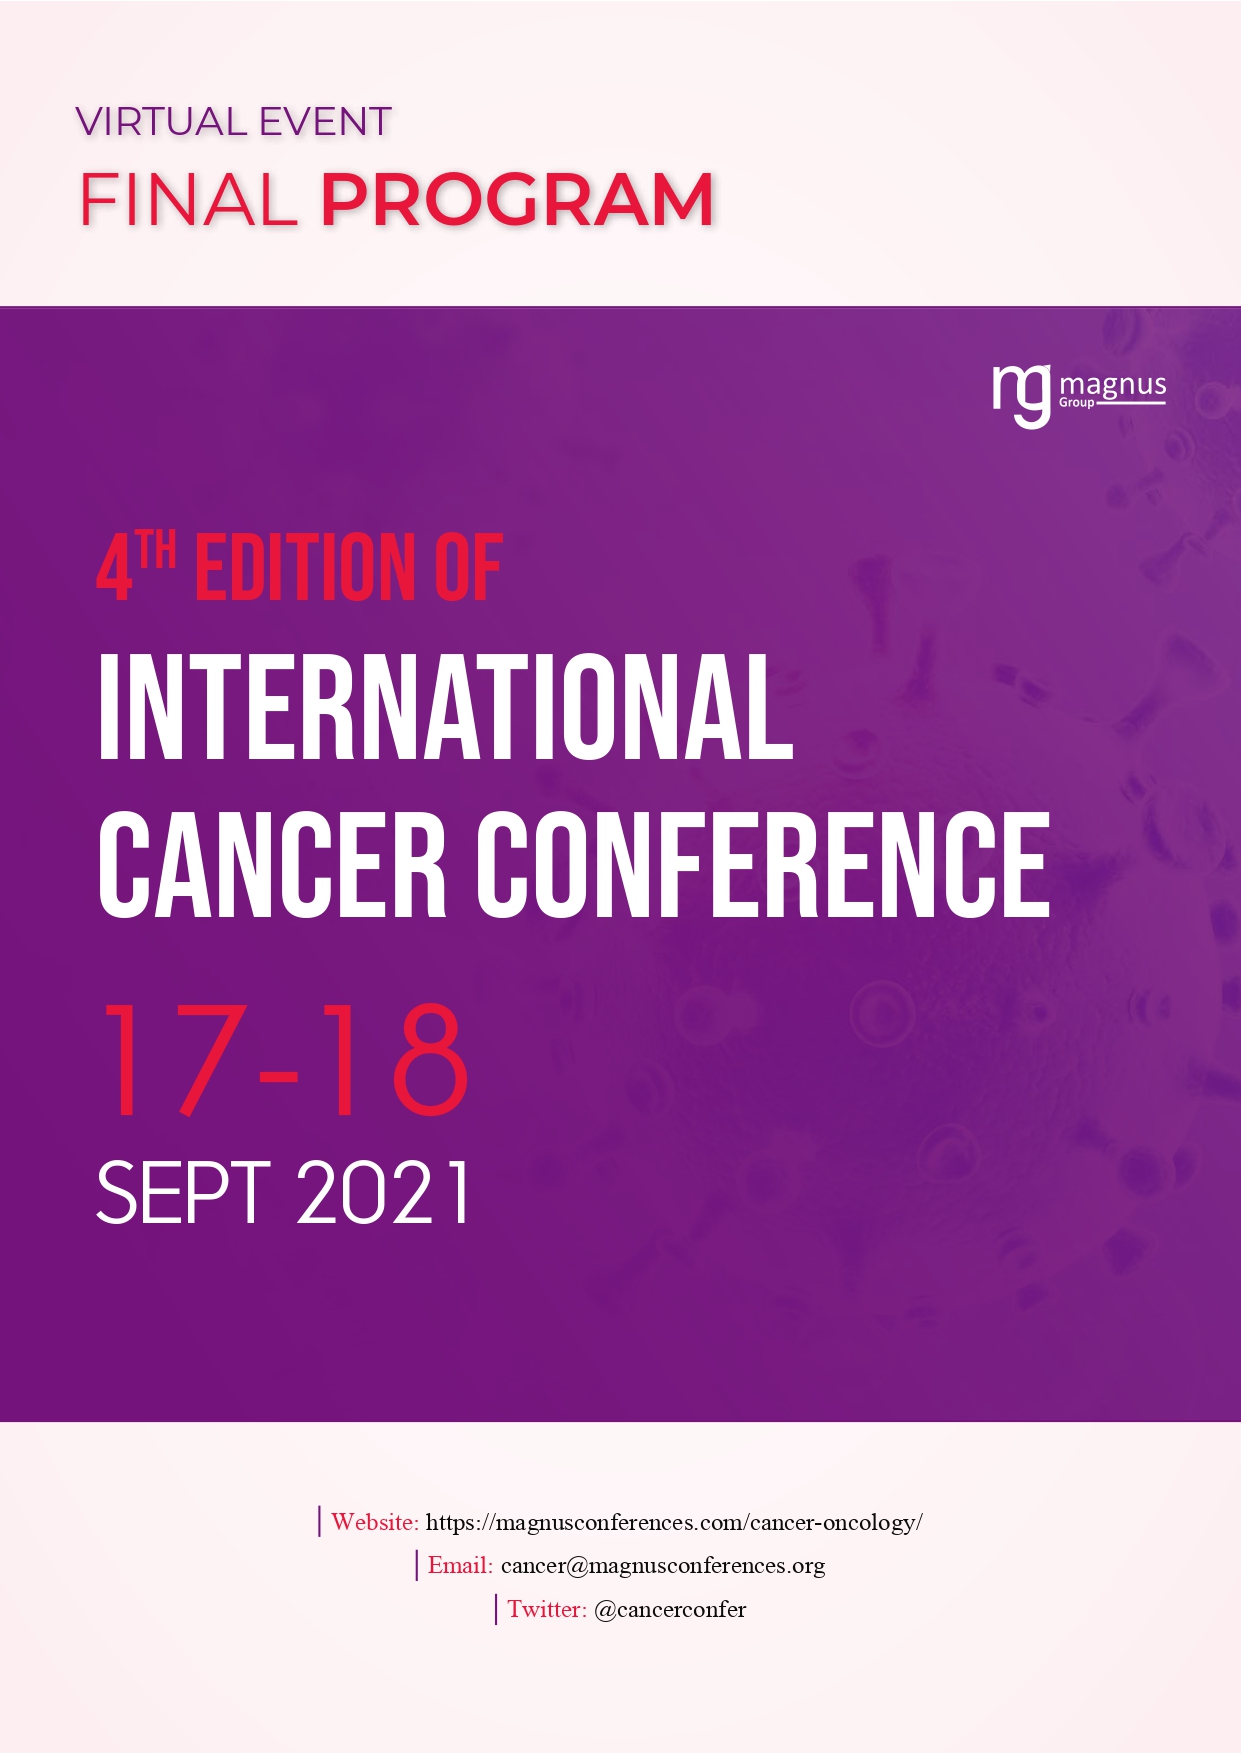 4th Edition of International Cancer Conference | Online Event Program